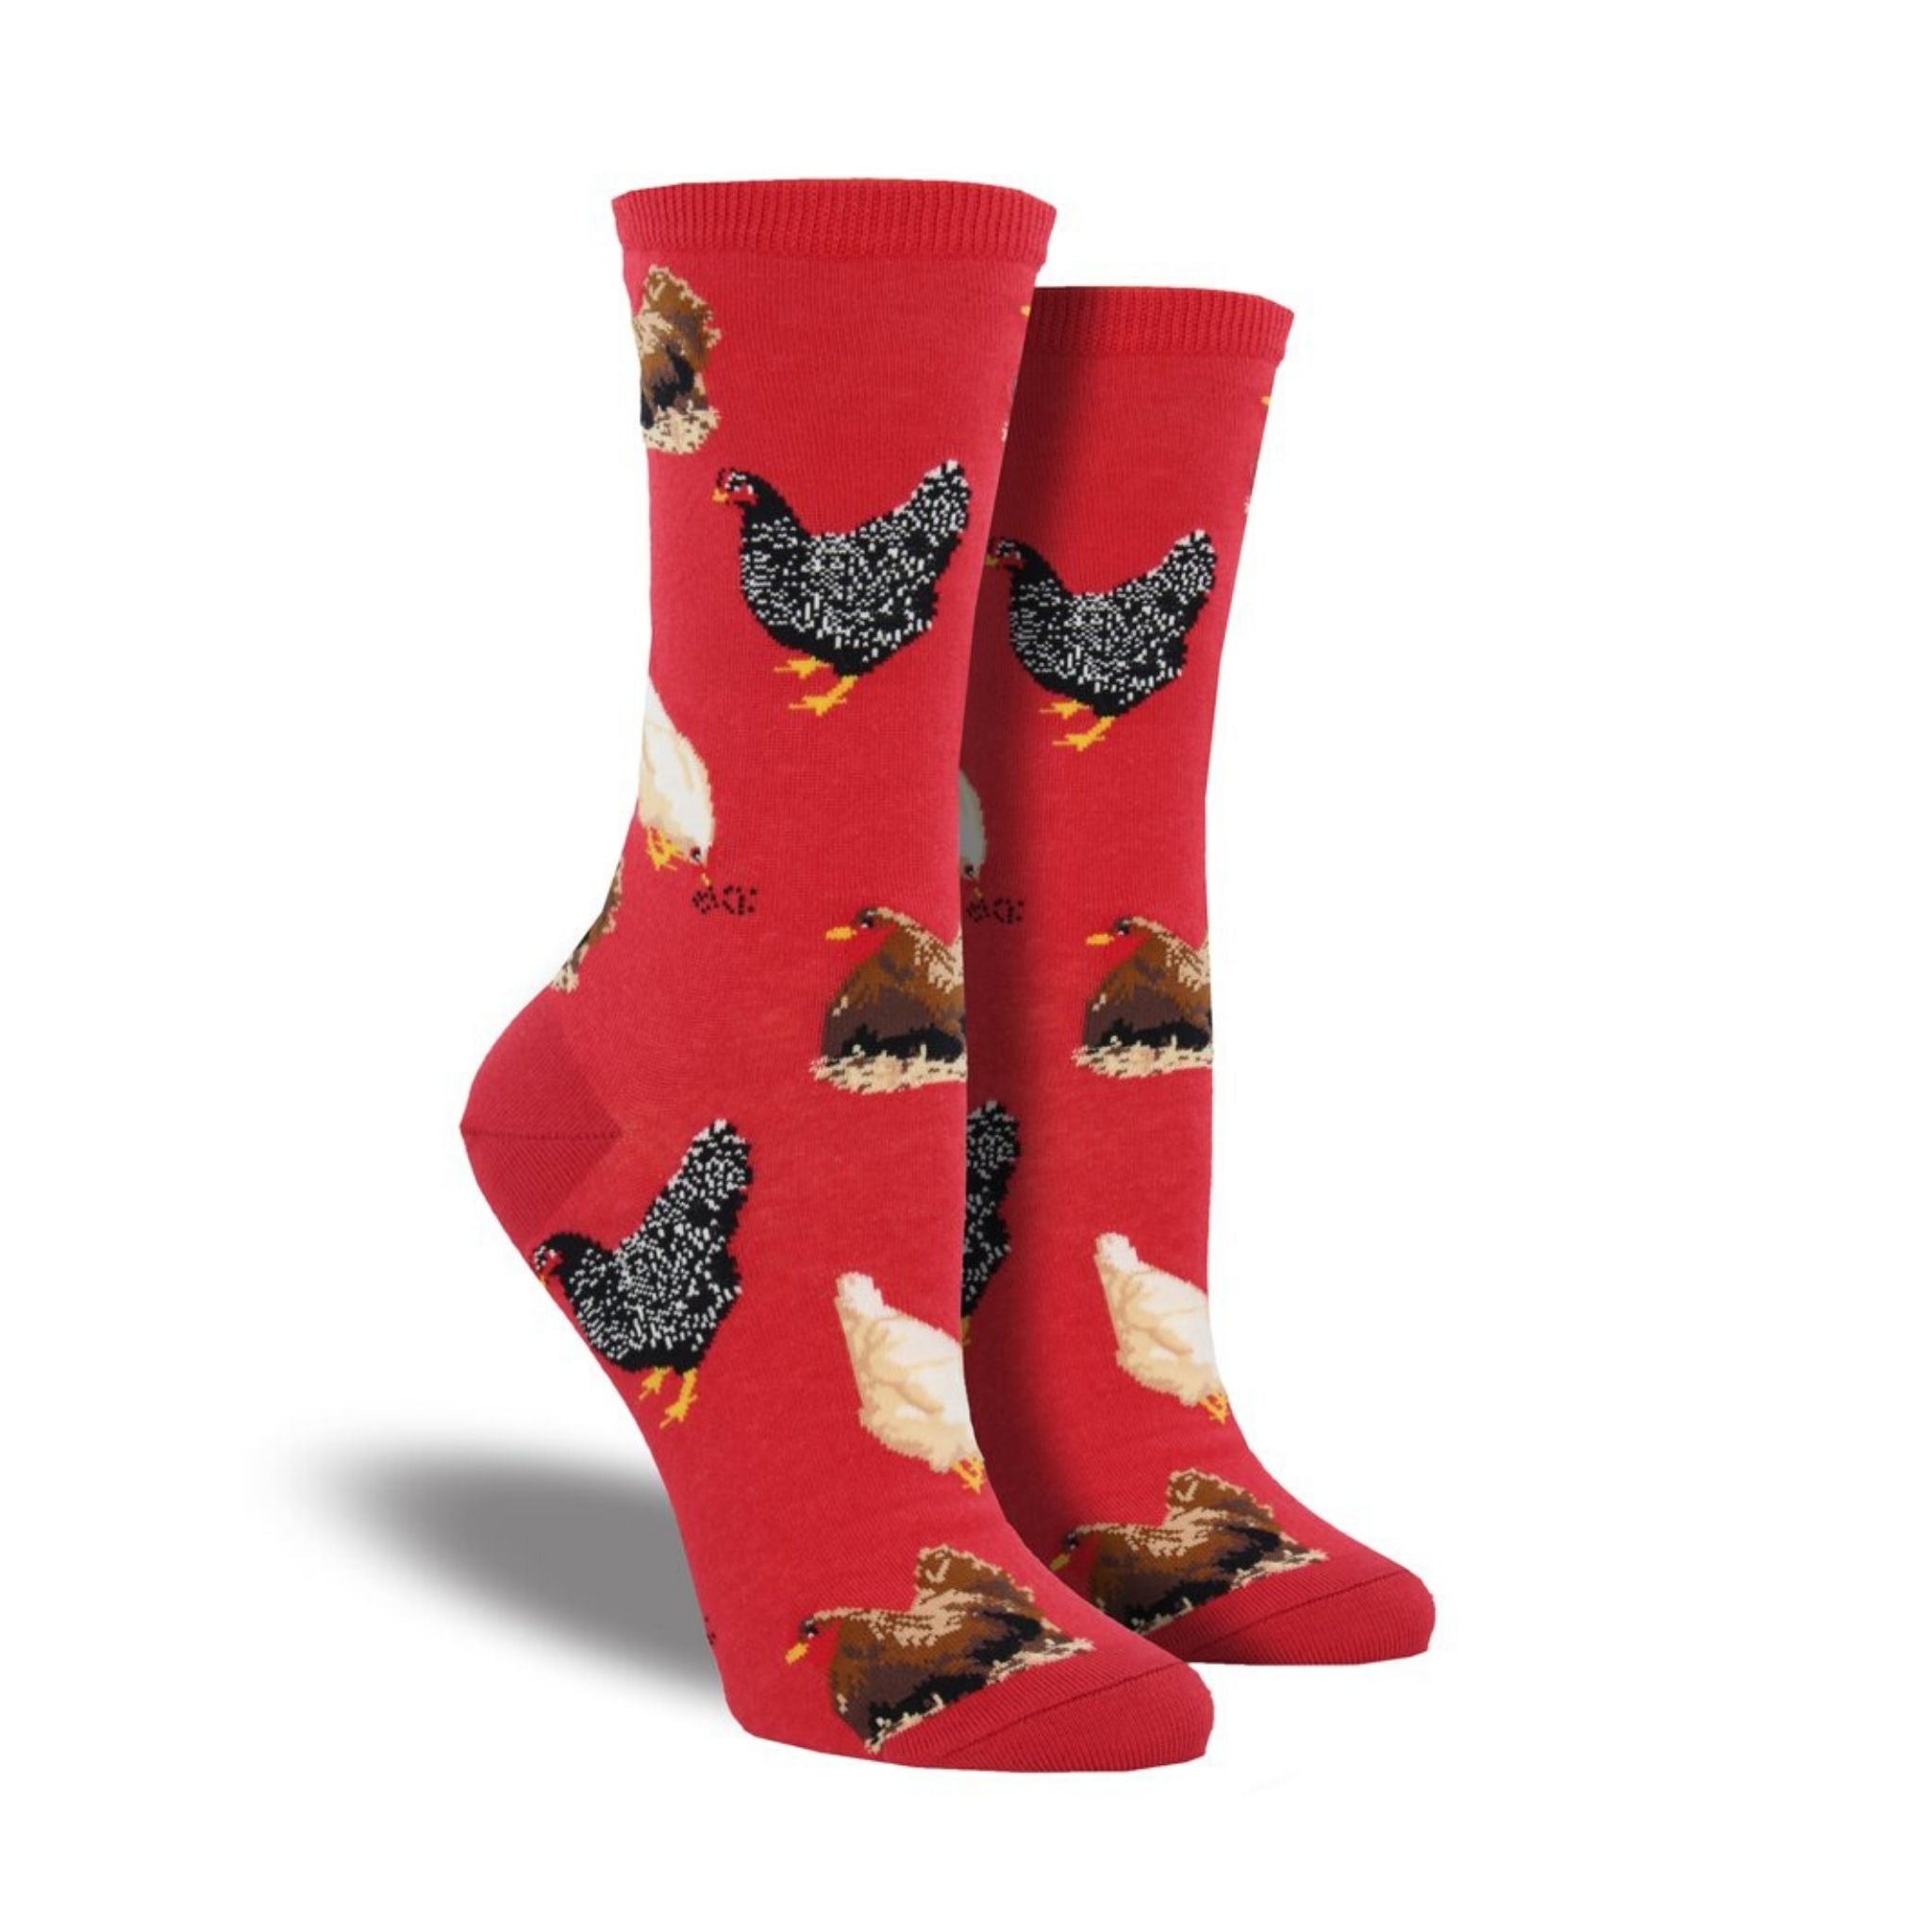 Red socks with hens on them